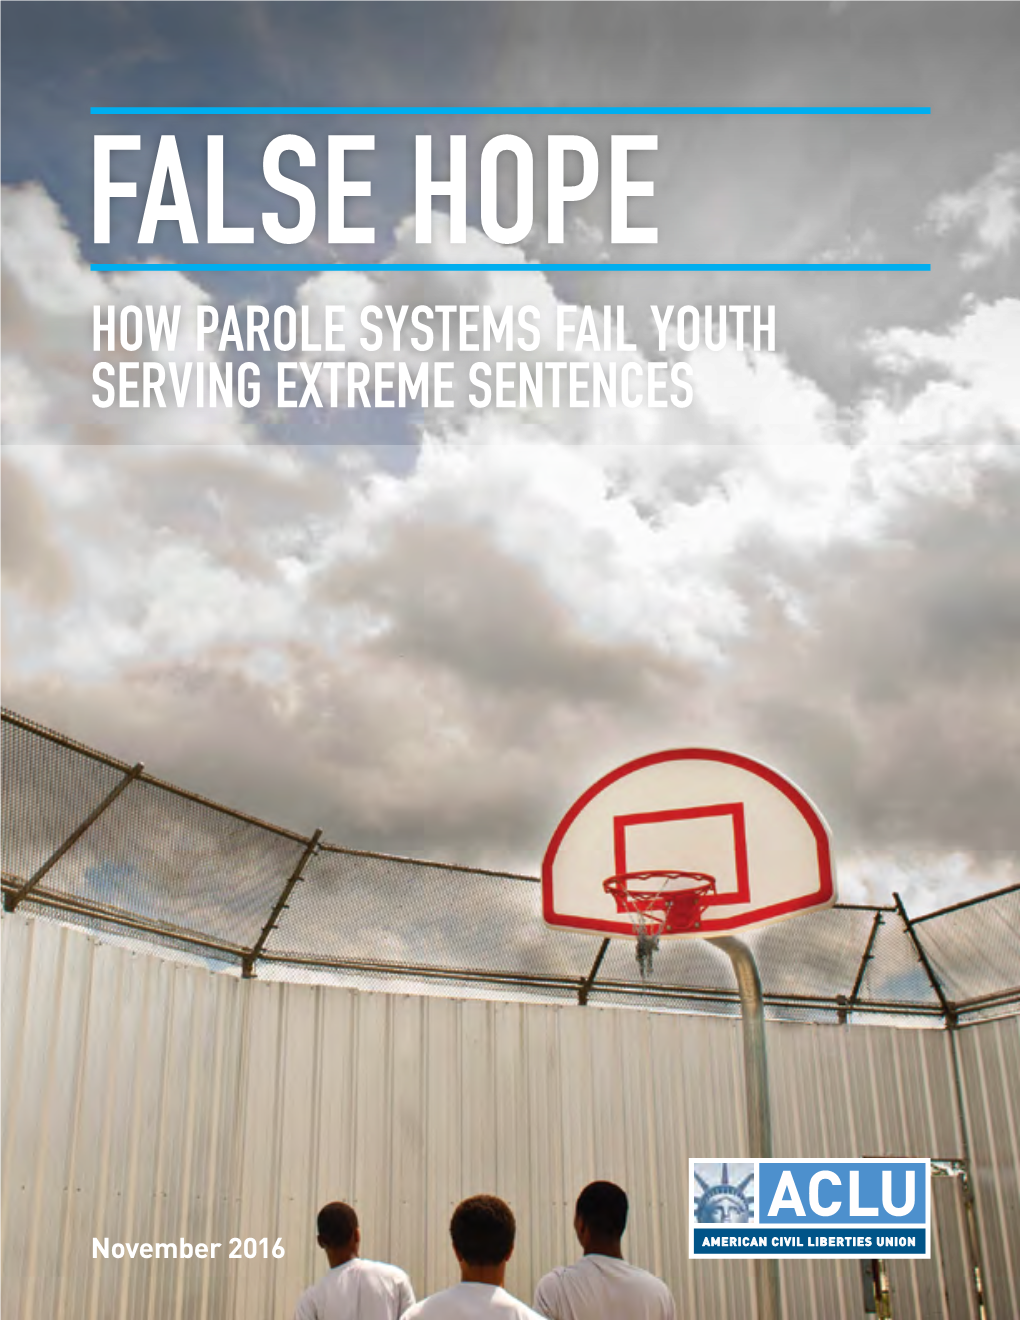 False Hope: How Parole Systems Fail Youth Serving Extreme Sentences 3 in 2015, the Parole Ga Grant Rate for Lifers in Georgia Was 11 Percent